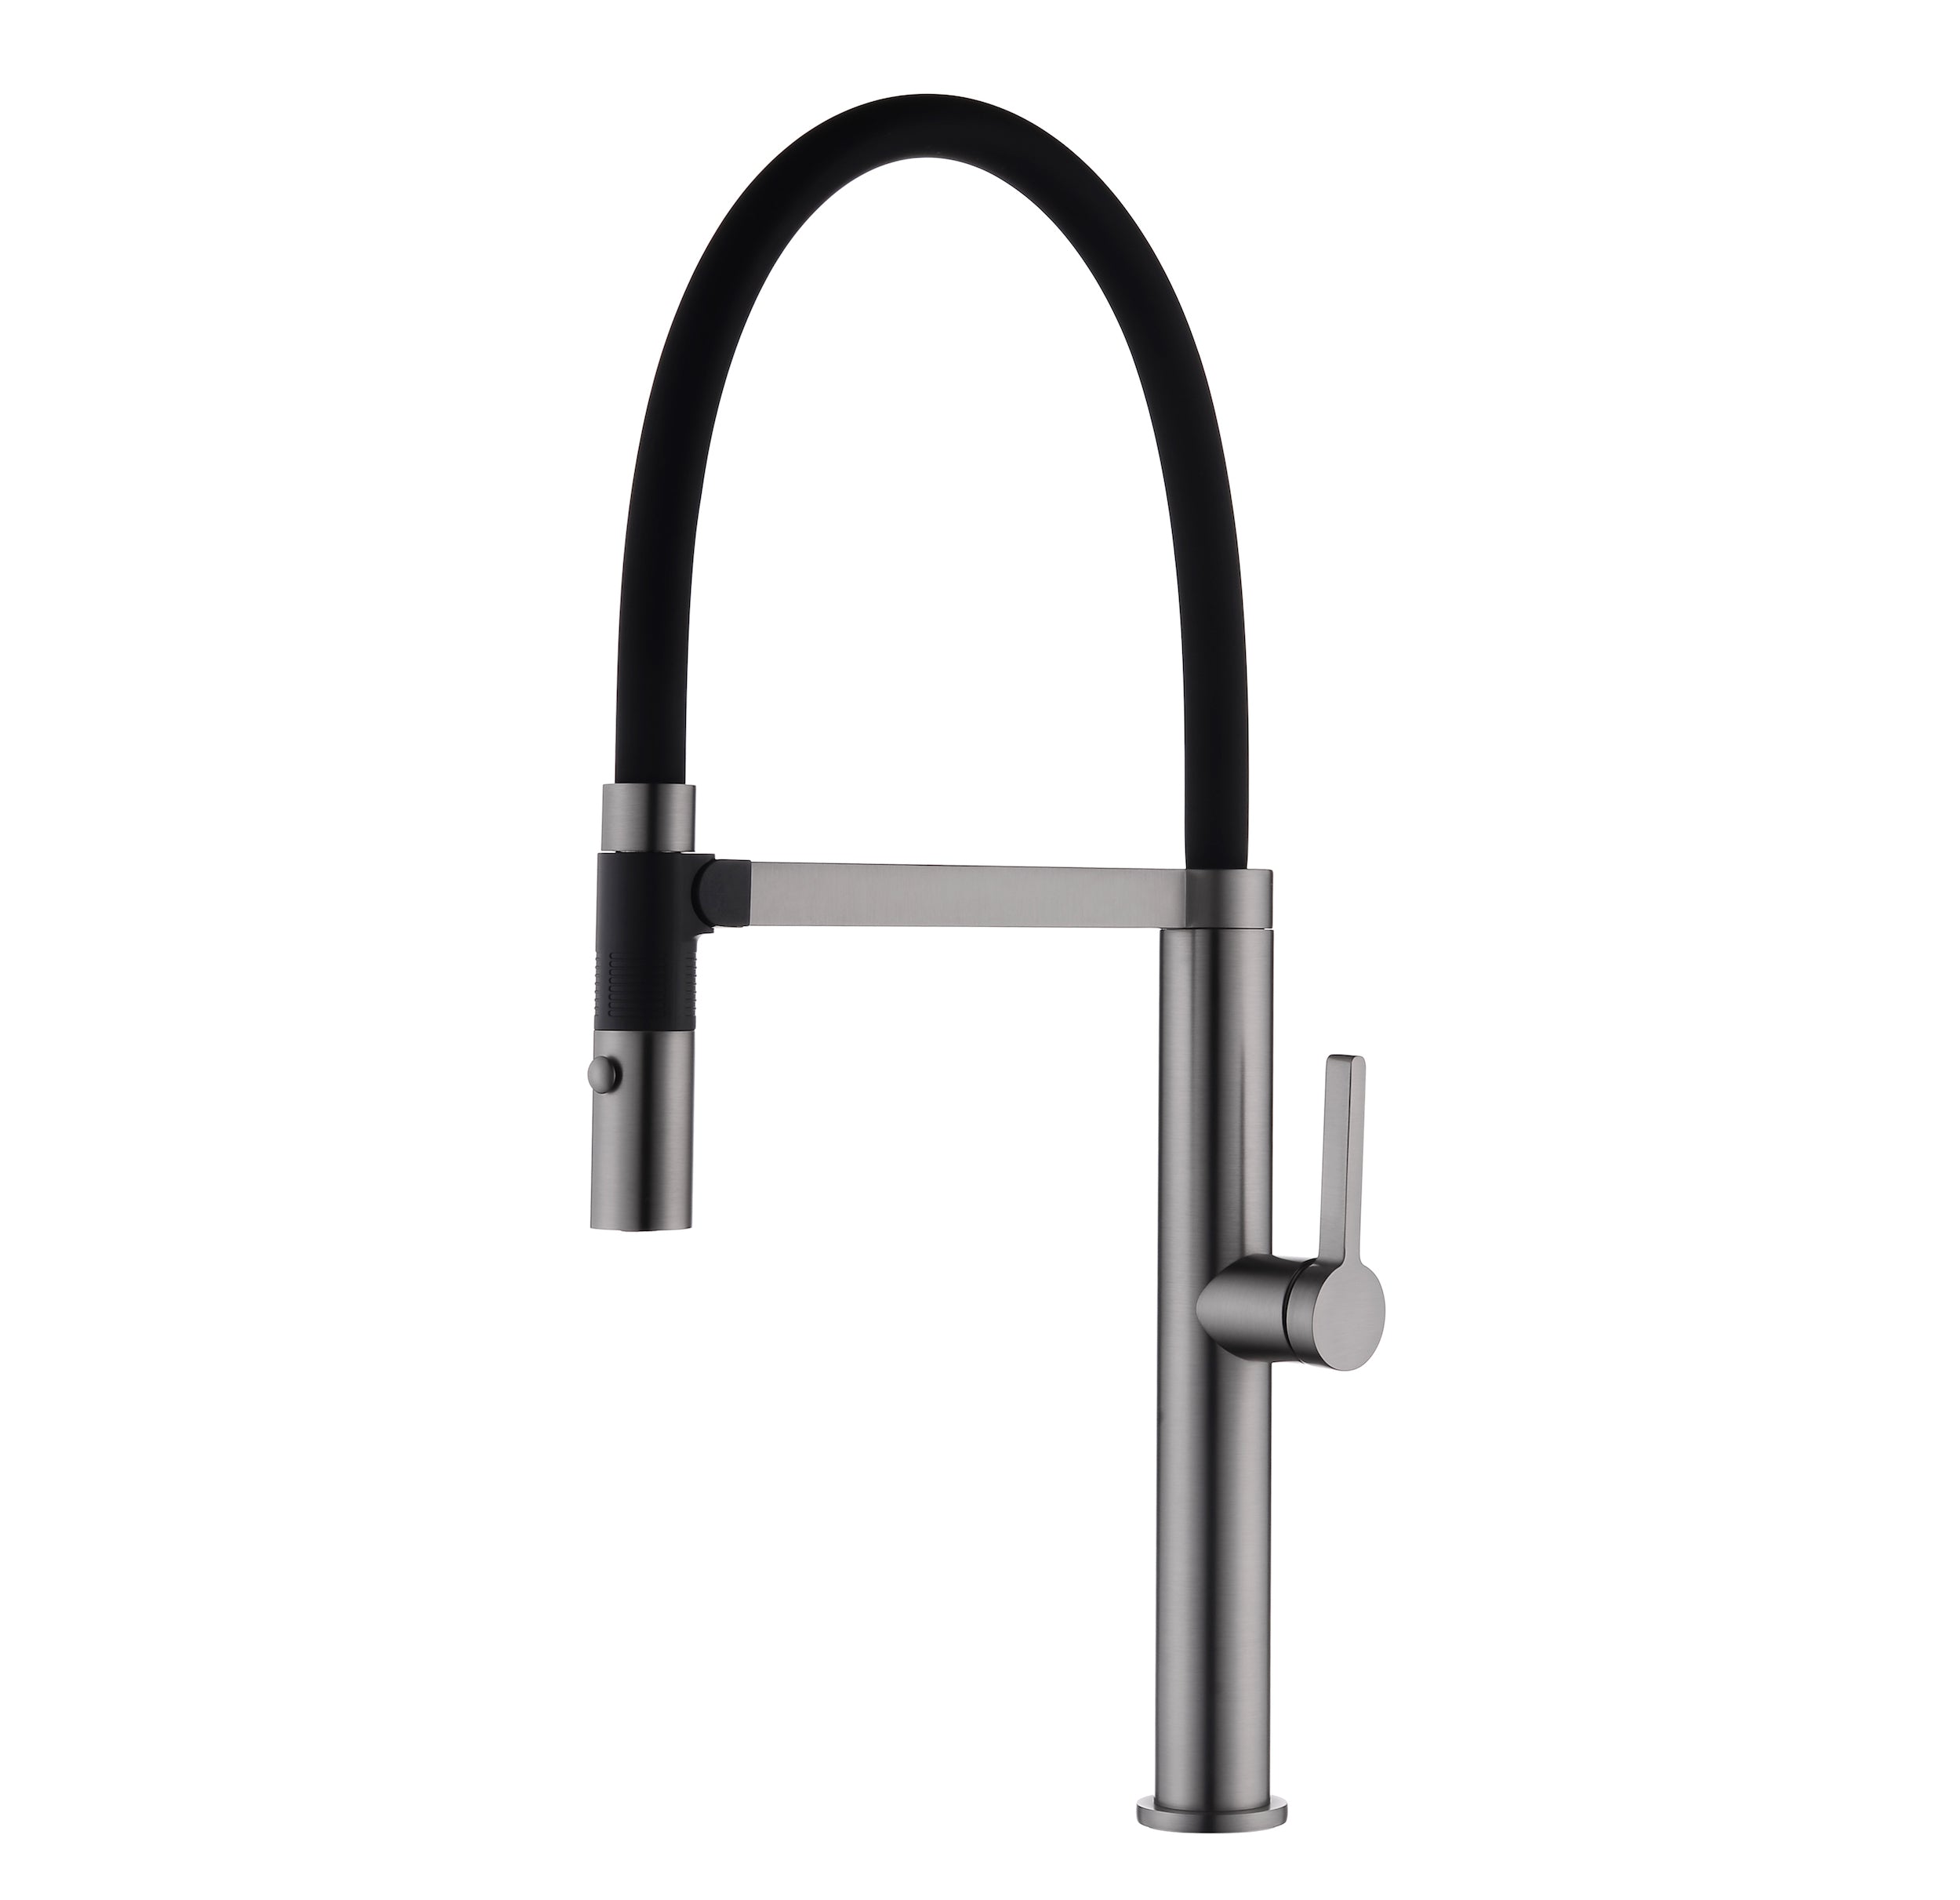 DAX Single Handle Pull Out Kitchen Faucet with Dual Sprayer, Brass Body and Shower Head, 9-3/16 x 21-5/8 Inches (DAX-S2417)